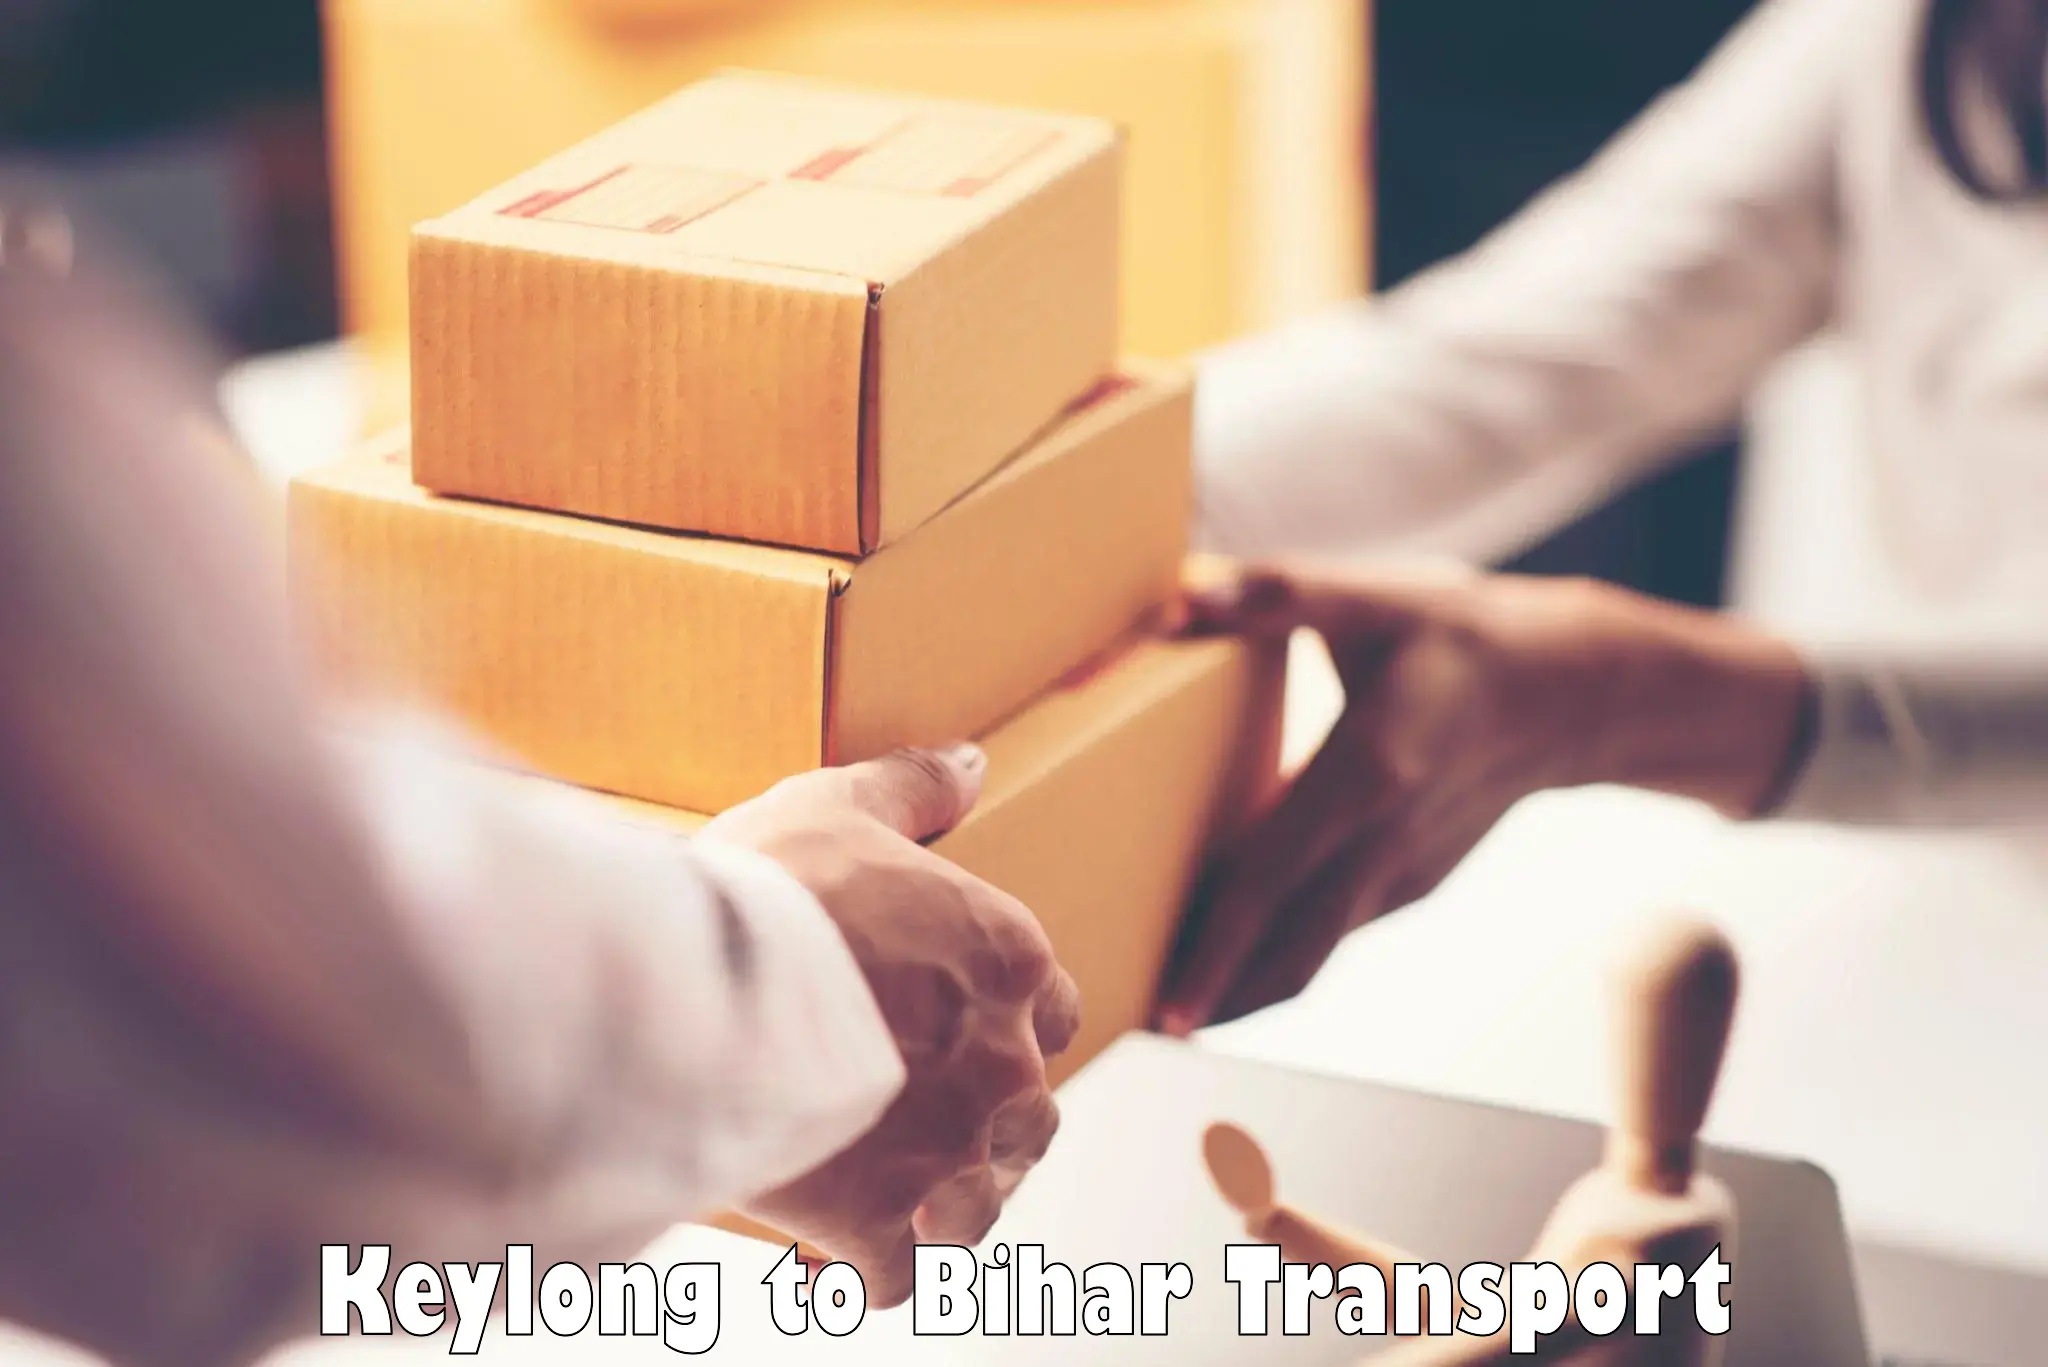 Daily transport service in Keylong to Punsia